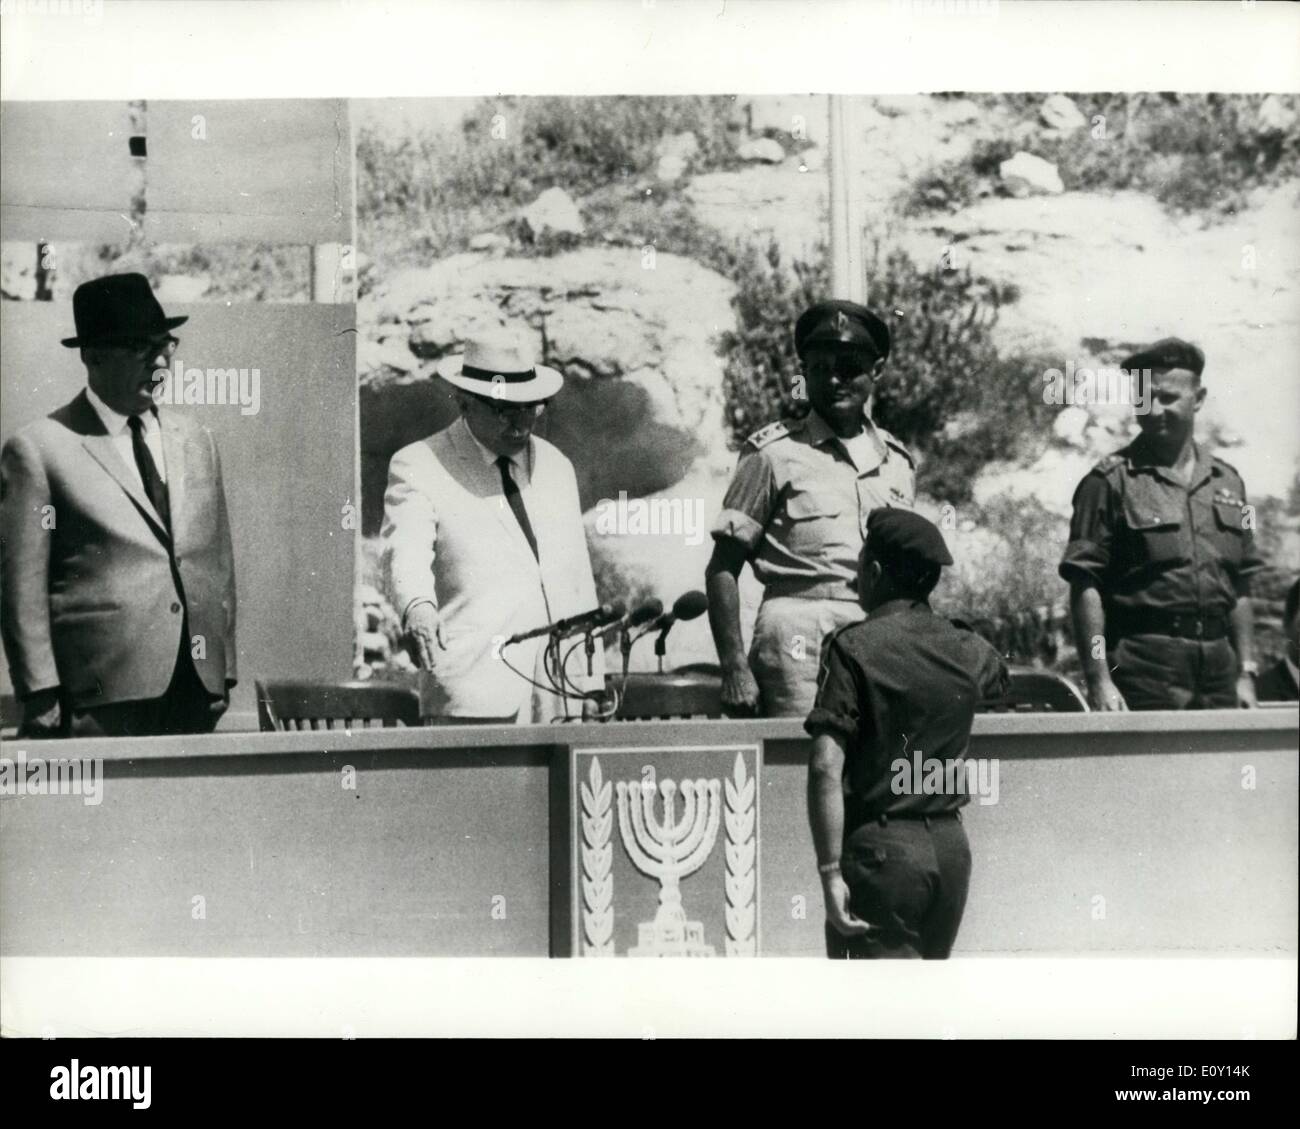 May 05, 1968 - Israel Celebrates 20th Anniversary of its Independence with Military Parade: Israel Celebrates 20th, years of Independence with a big Military parade through the a street of Jerusalem on Thursday (May 22nd). Picture Shows: On the saluting base from left are, The Prime Minister, Mr. Eshkol, the President of Iasrael Zalman Shazar, General Moshe Dayan and G.O.C. General Command UZI Narkis. Stock Photo